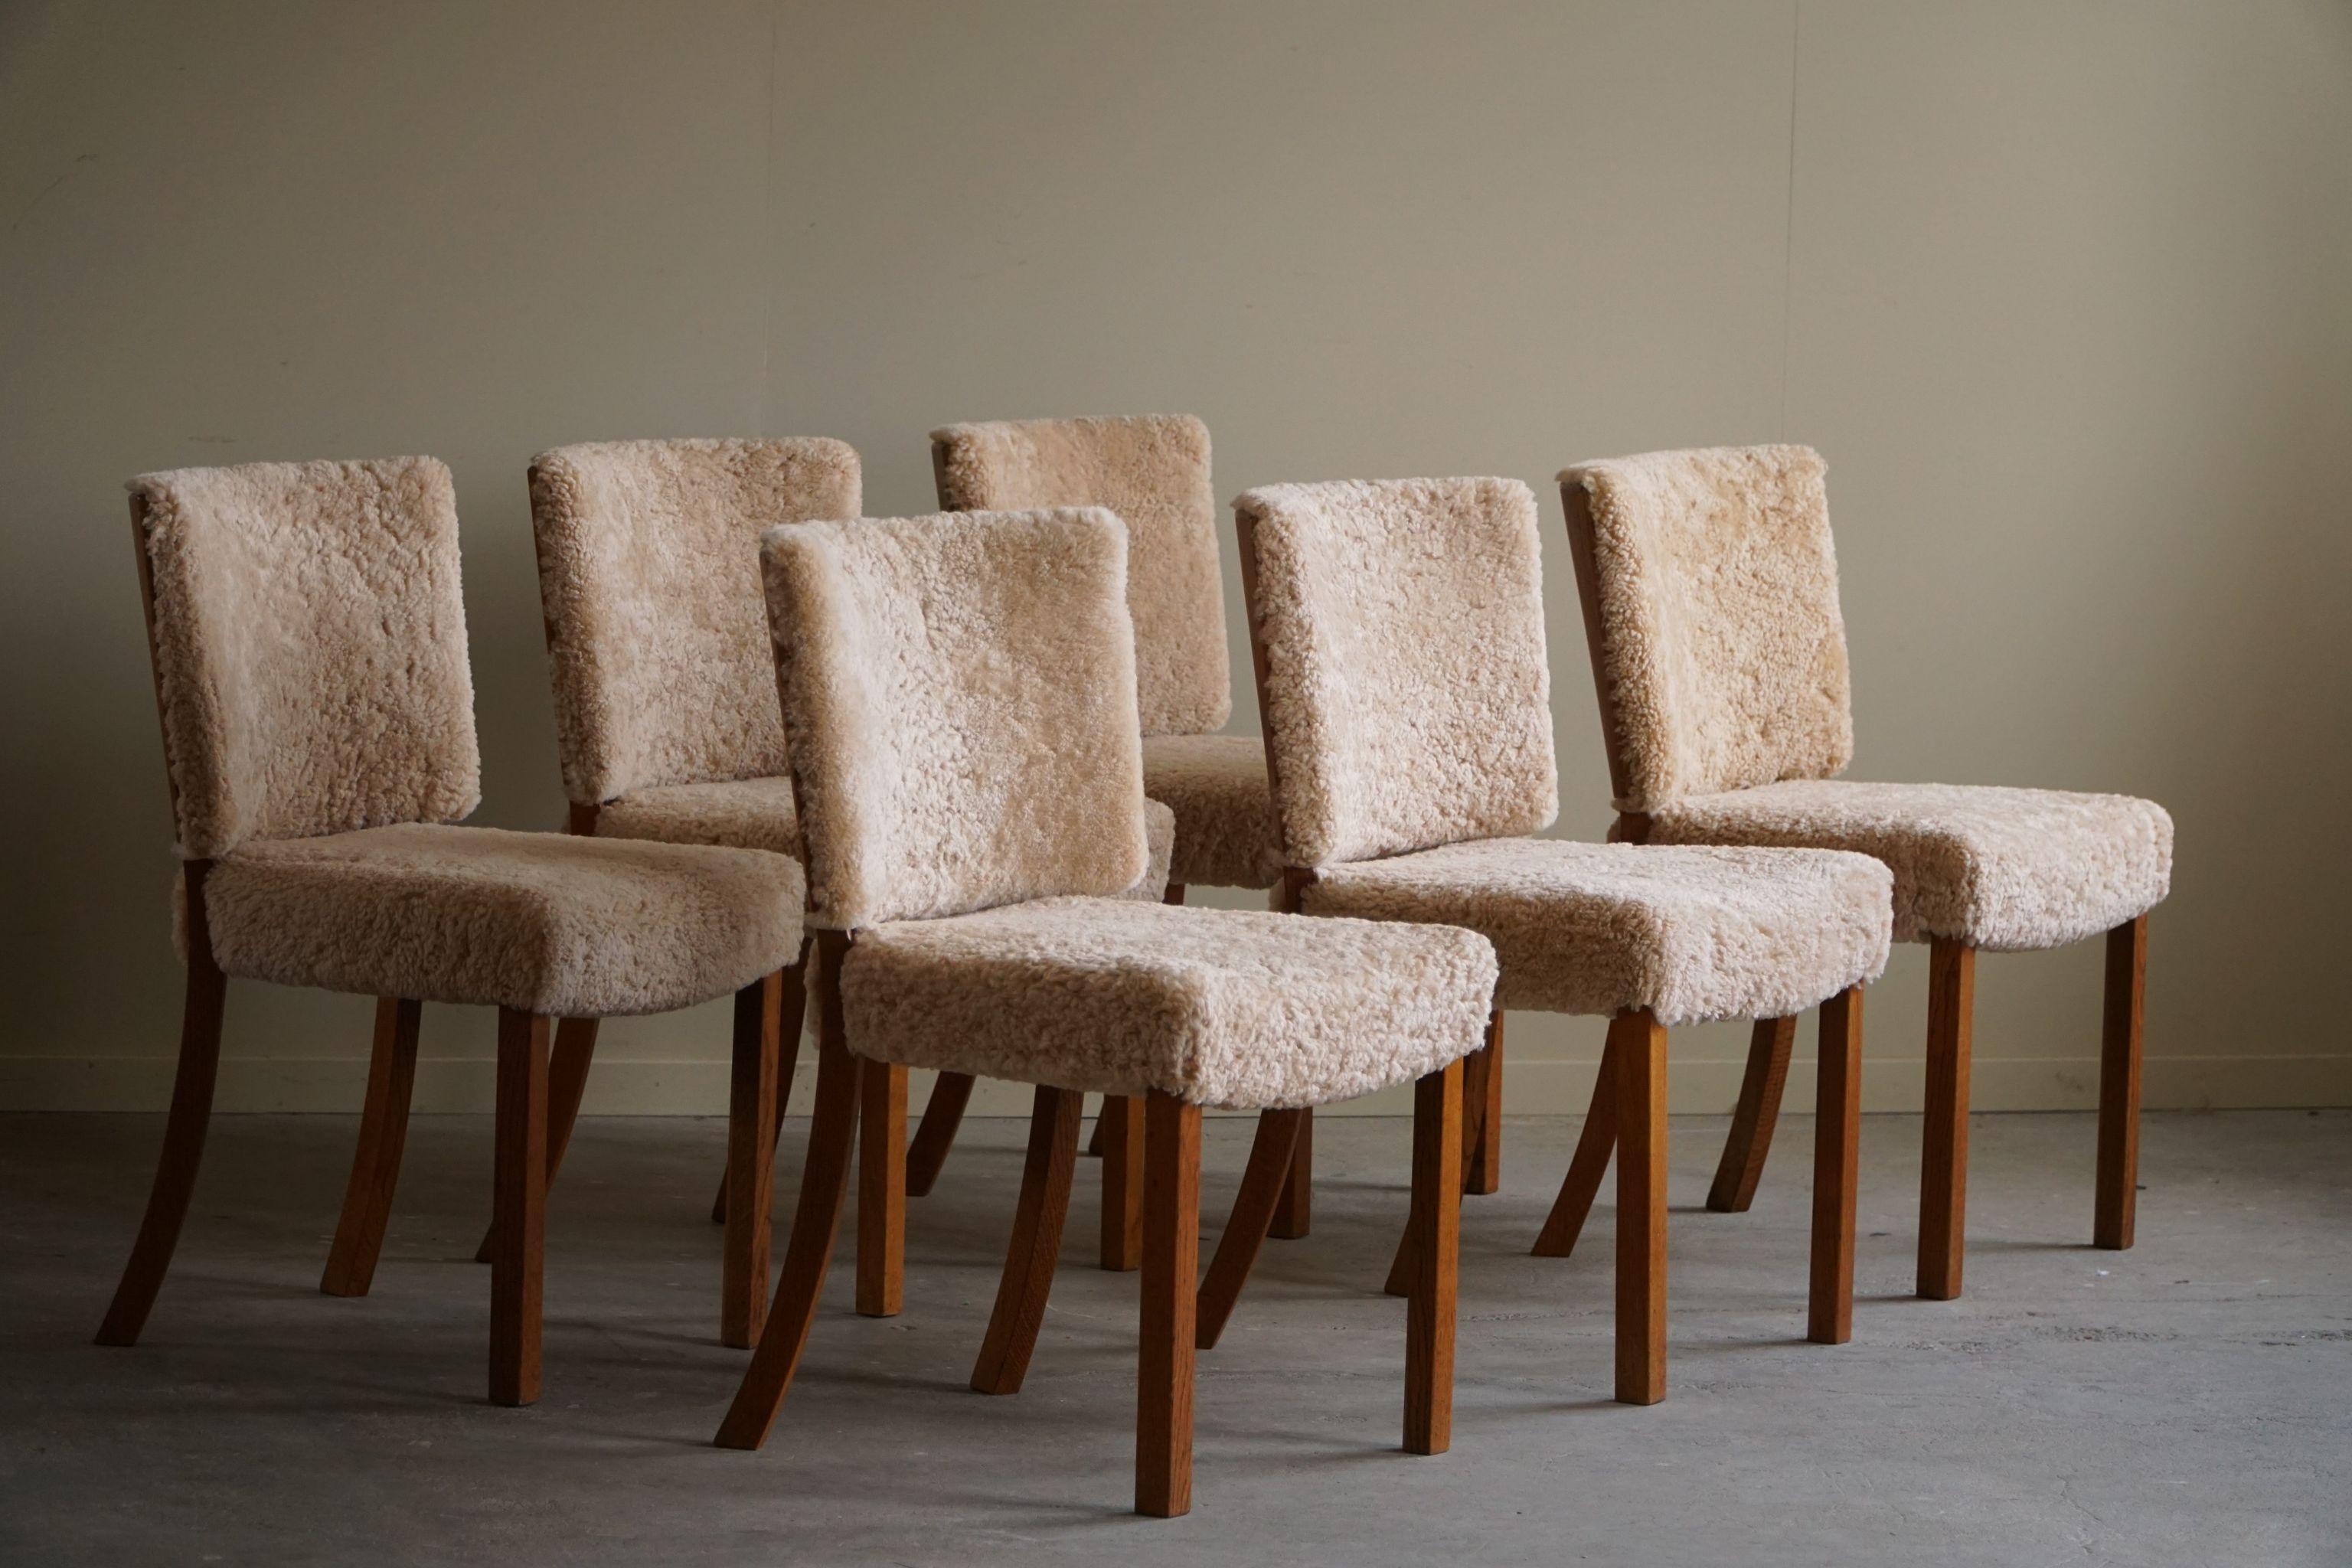 A rare set of 6 classic dining chairs / desk chairs, attributed to Kaj Gottlob for Fritz Hansen. Made in the 1940 - 1950s. Newly reupholstered in a great quality shearling lambswool, elegant shaped legs made in solid oak. The general impression is